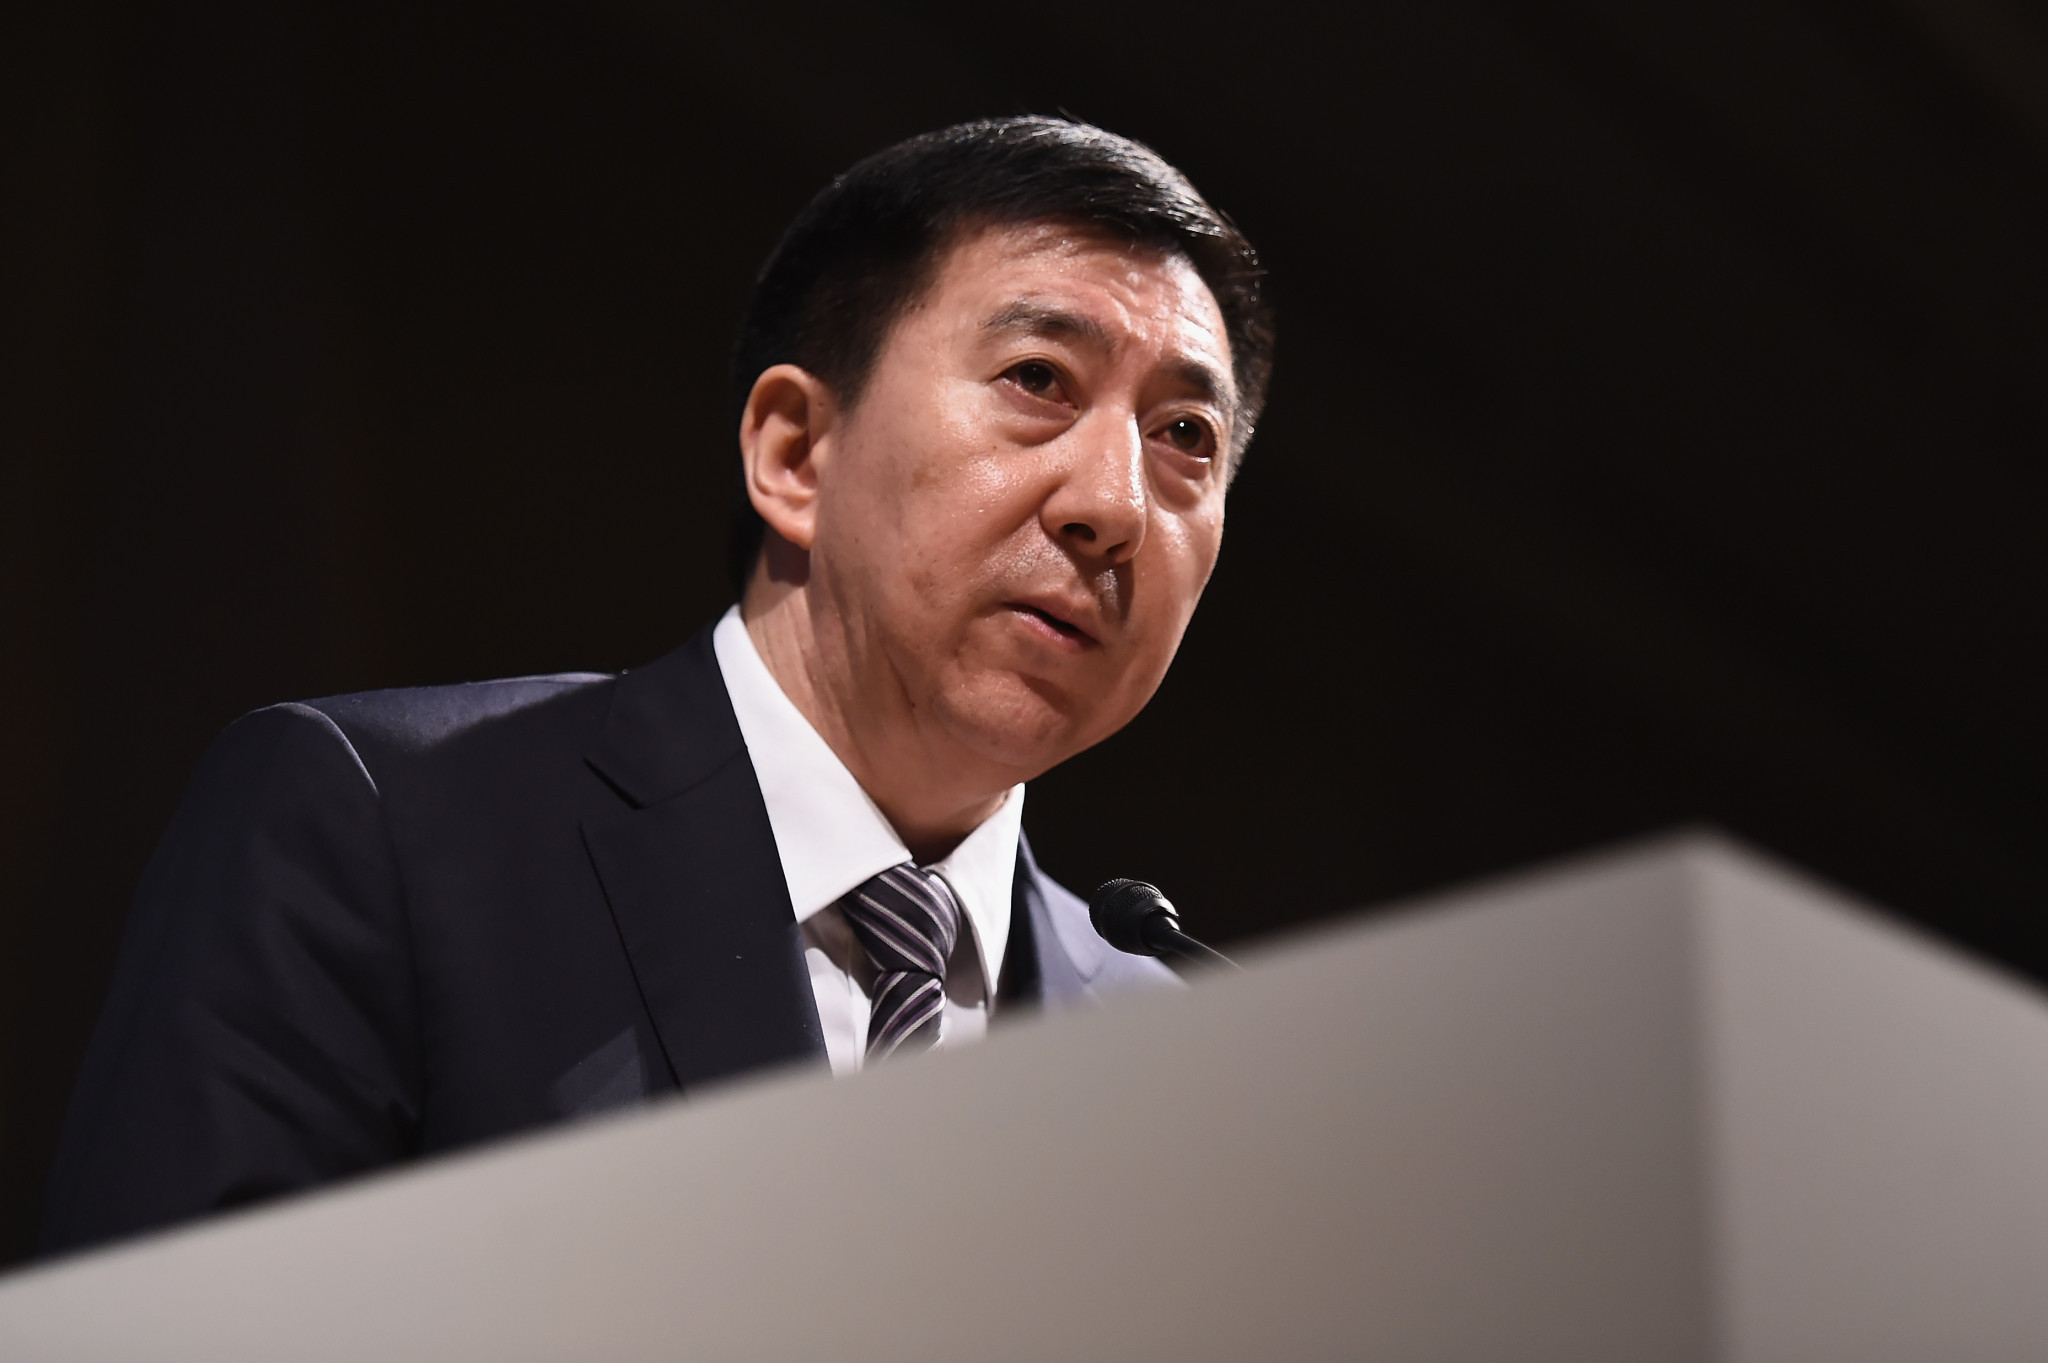 Beijing 2022 executive vice-president Zhang Jiandong claimed a high standard of preparation has been maintained despite the impact of the coronavirus pandemic ©Getty Images